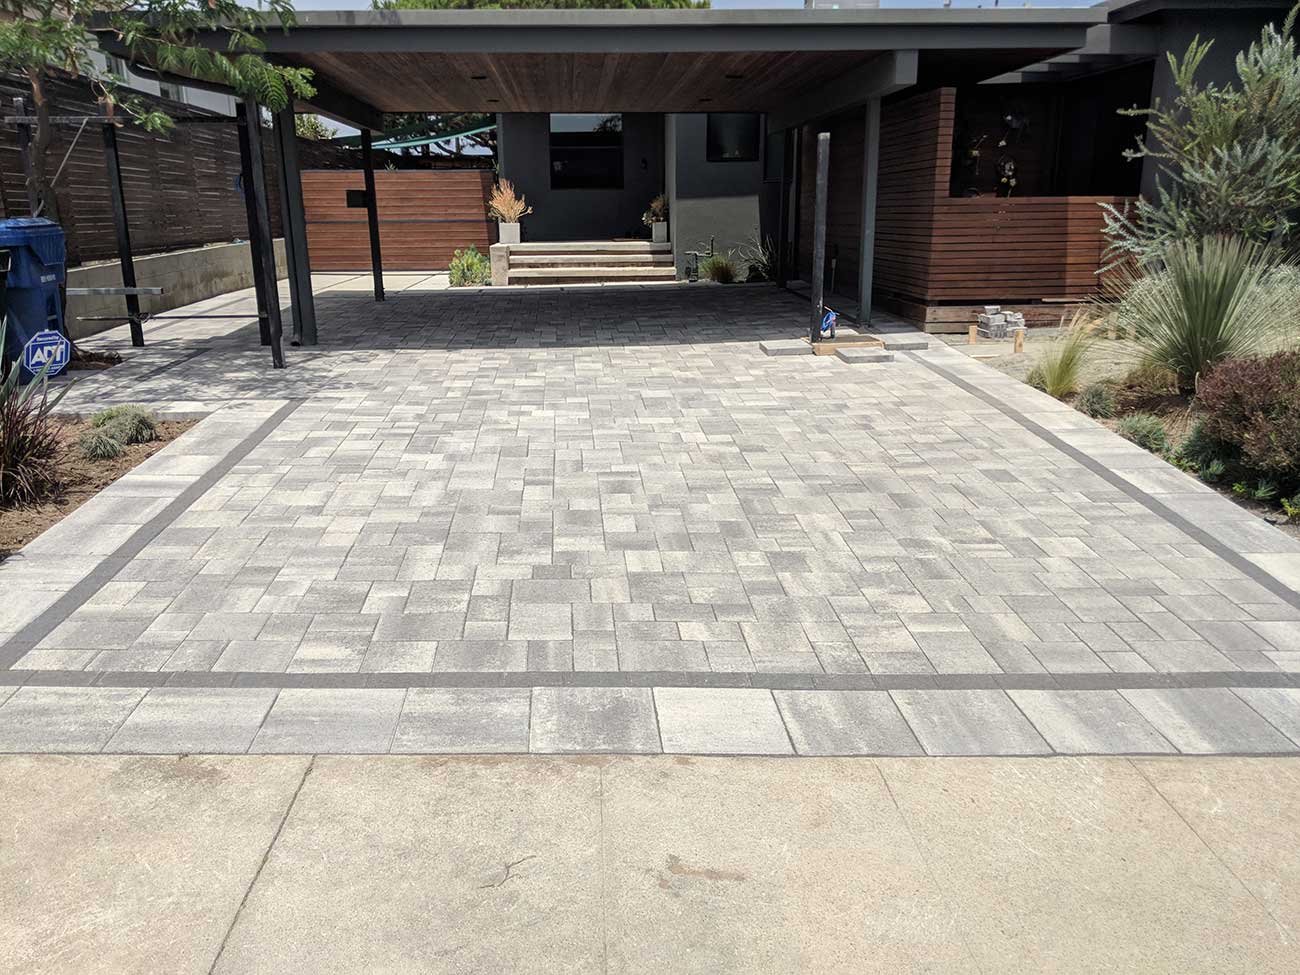 Angelus Courtyard paver driveway in Gray Charcoal color with 15x15 Border